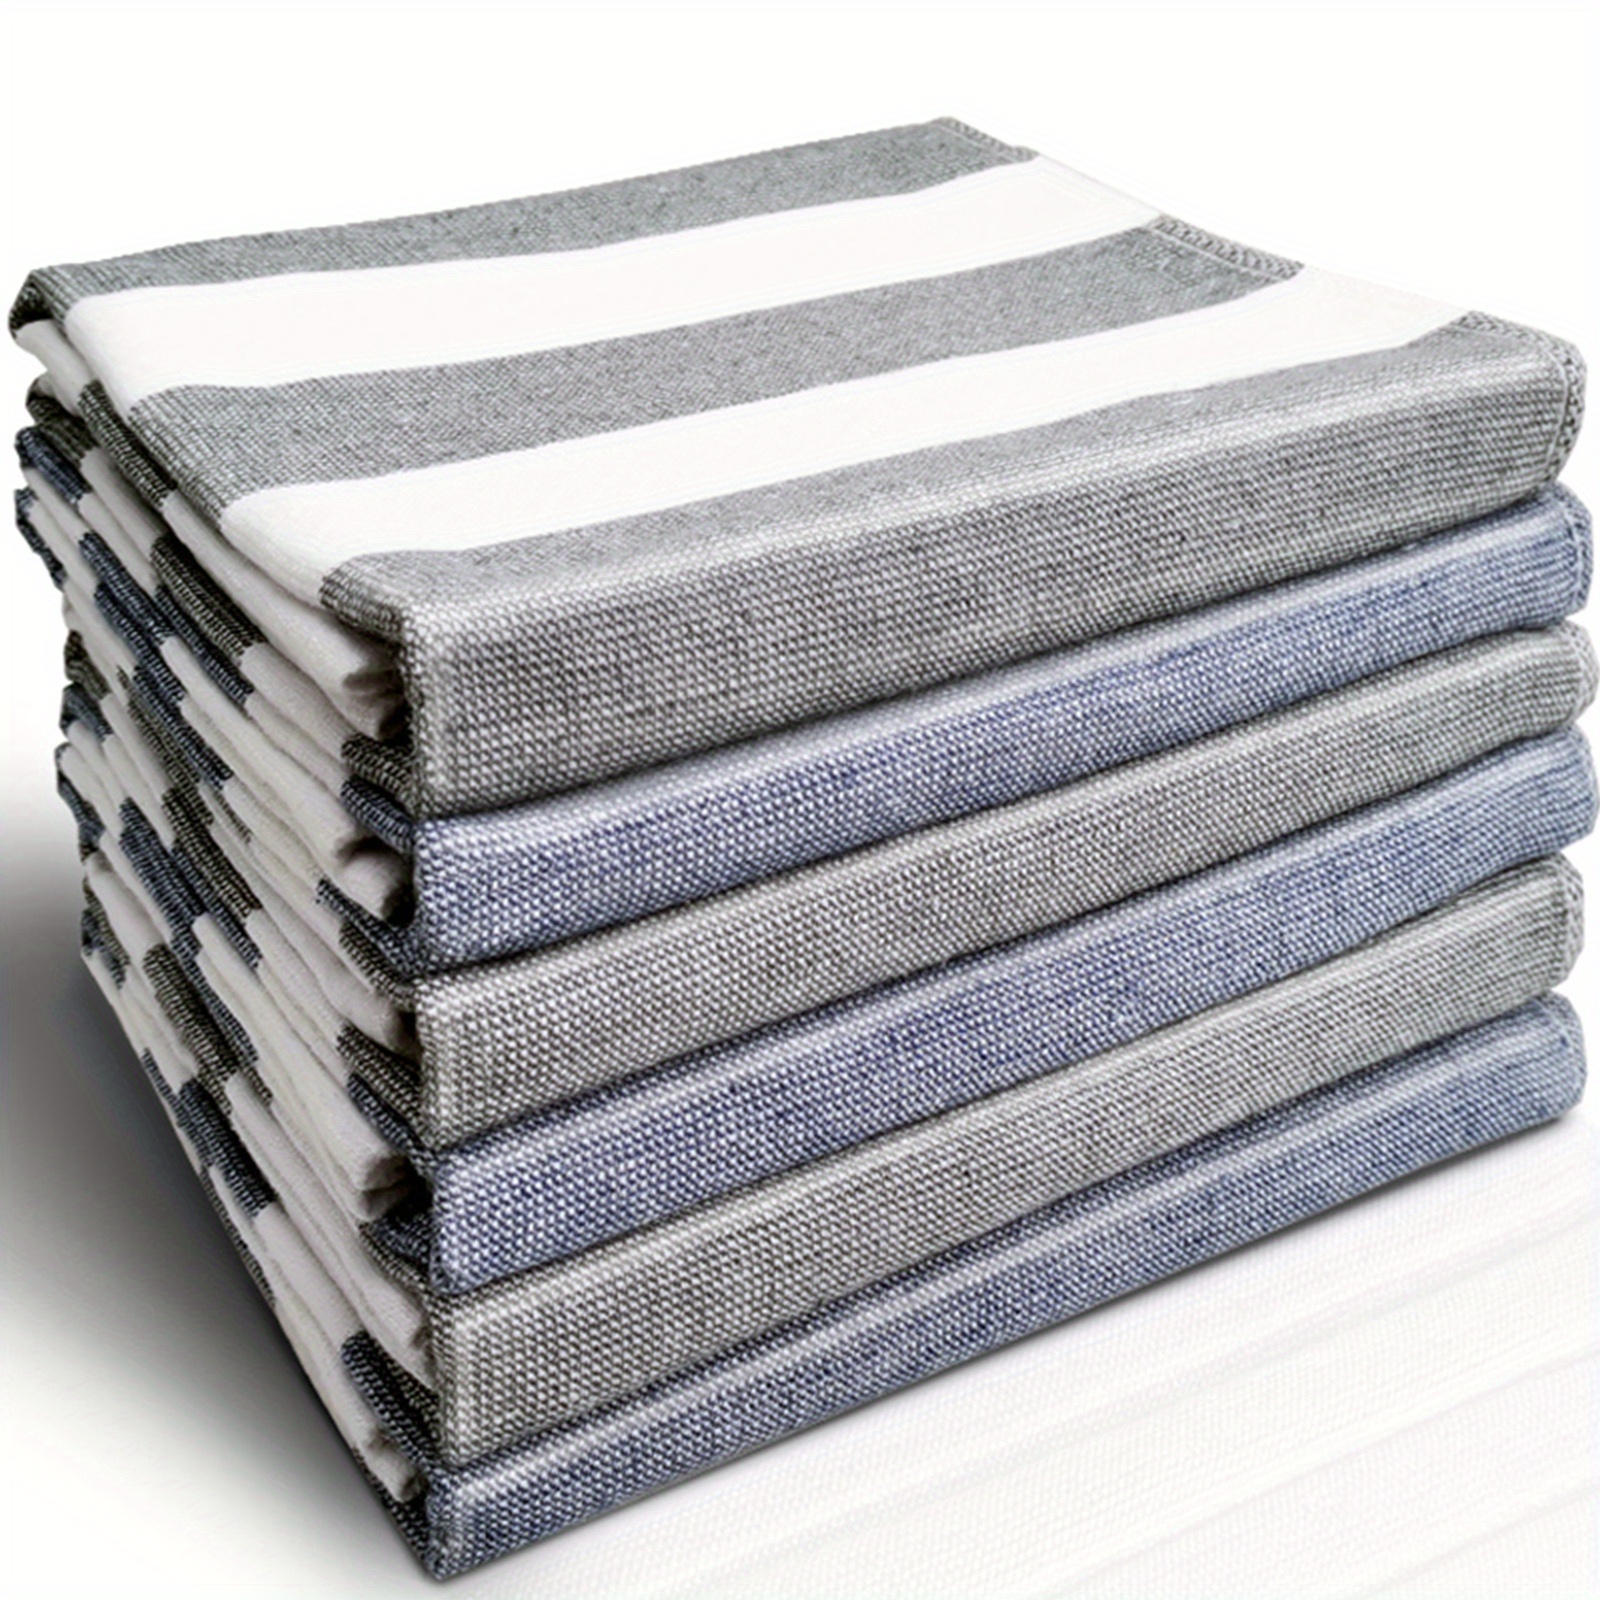 6 Waffle Weave Kitchen Dish Cloths 100 Cotton Quick Drying 12x12 in Dark  Grey for sale online